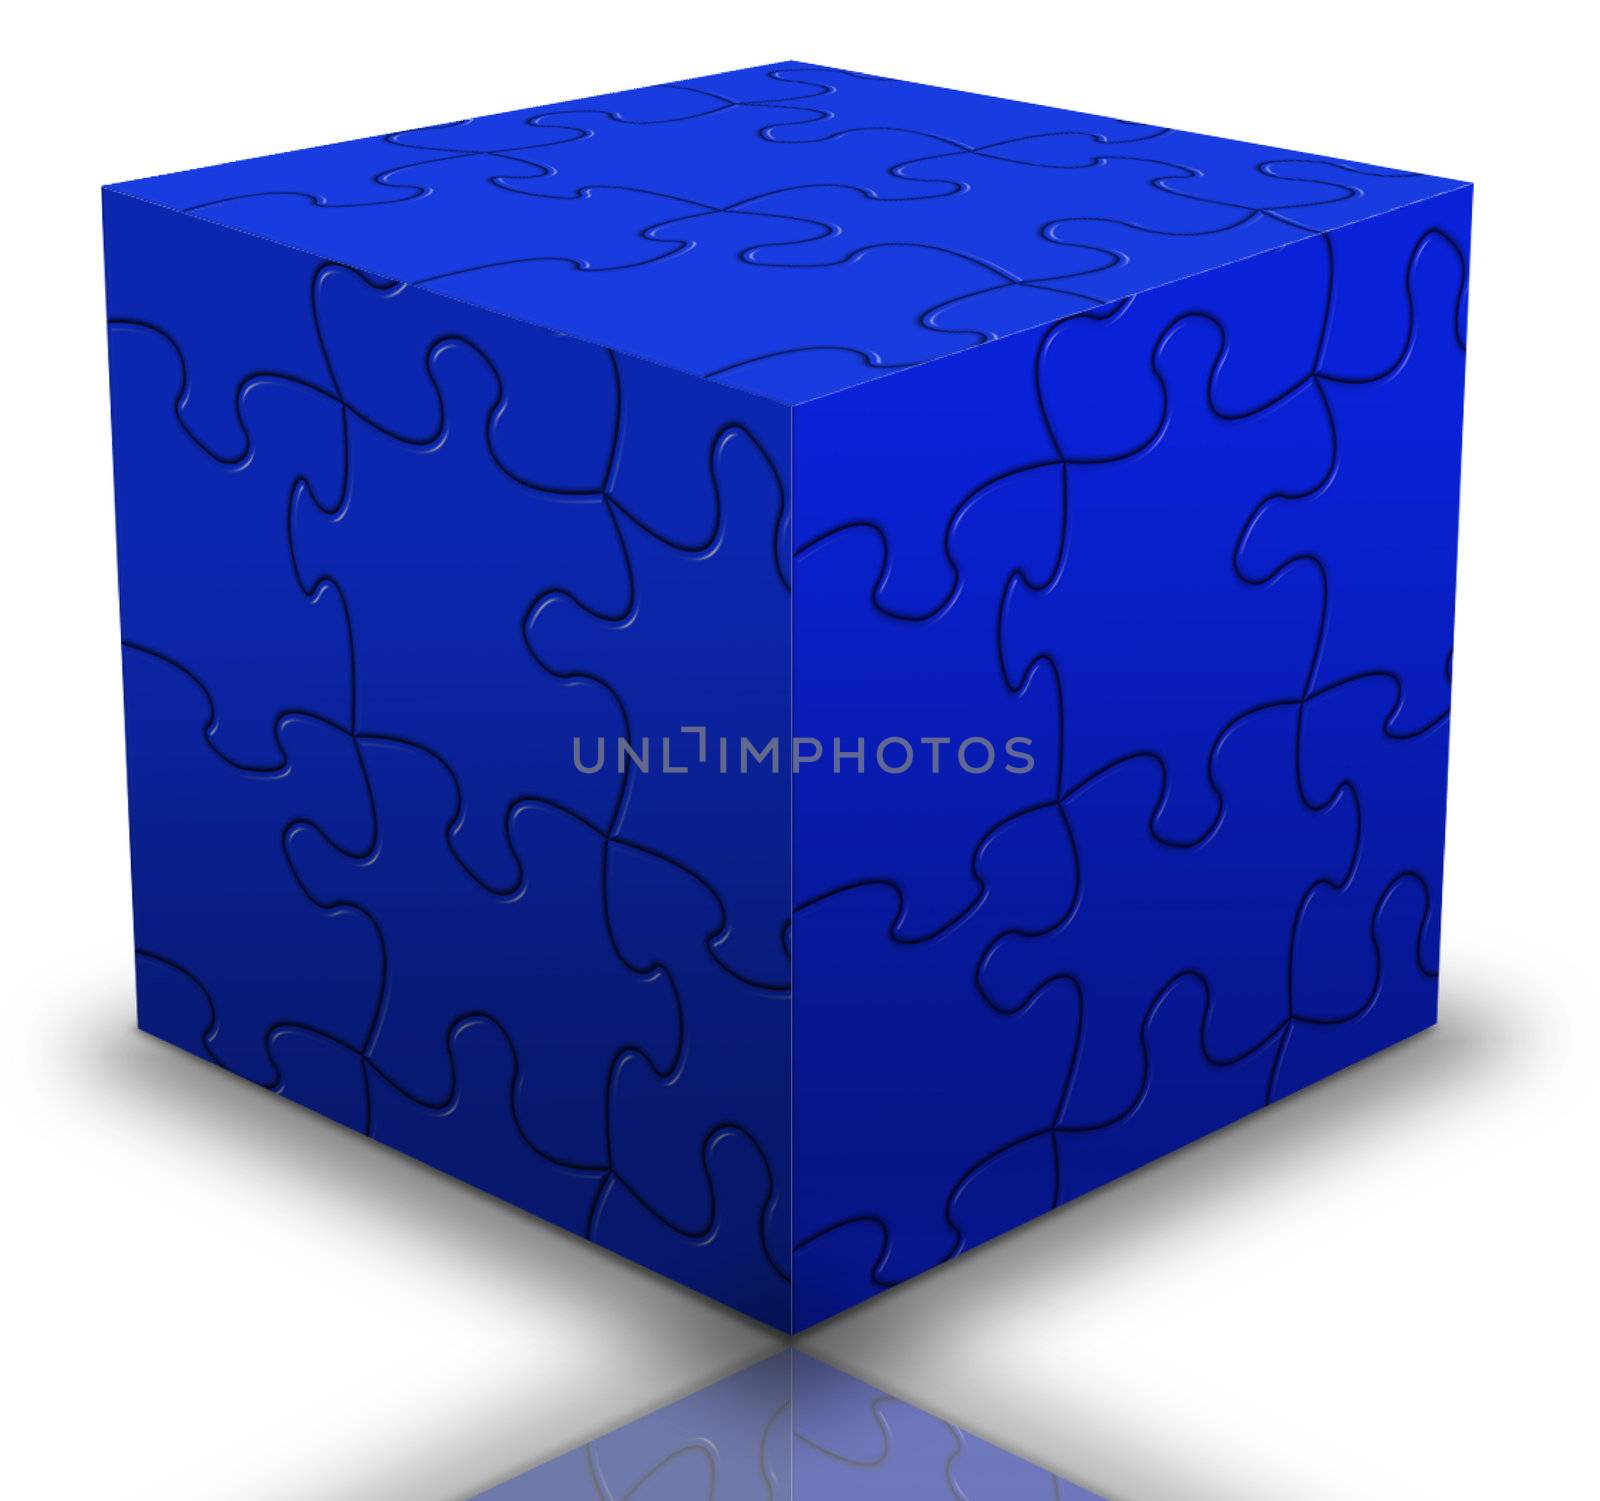 A cube in blue with puzzle pieces assembly